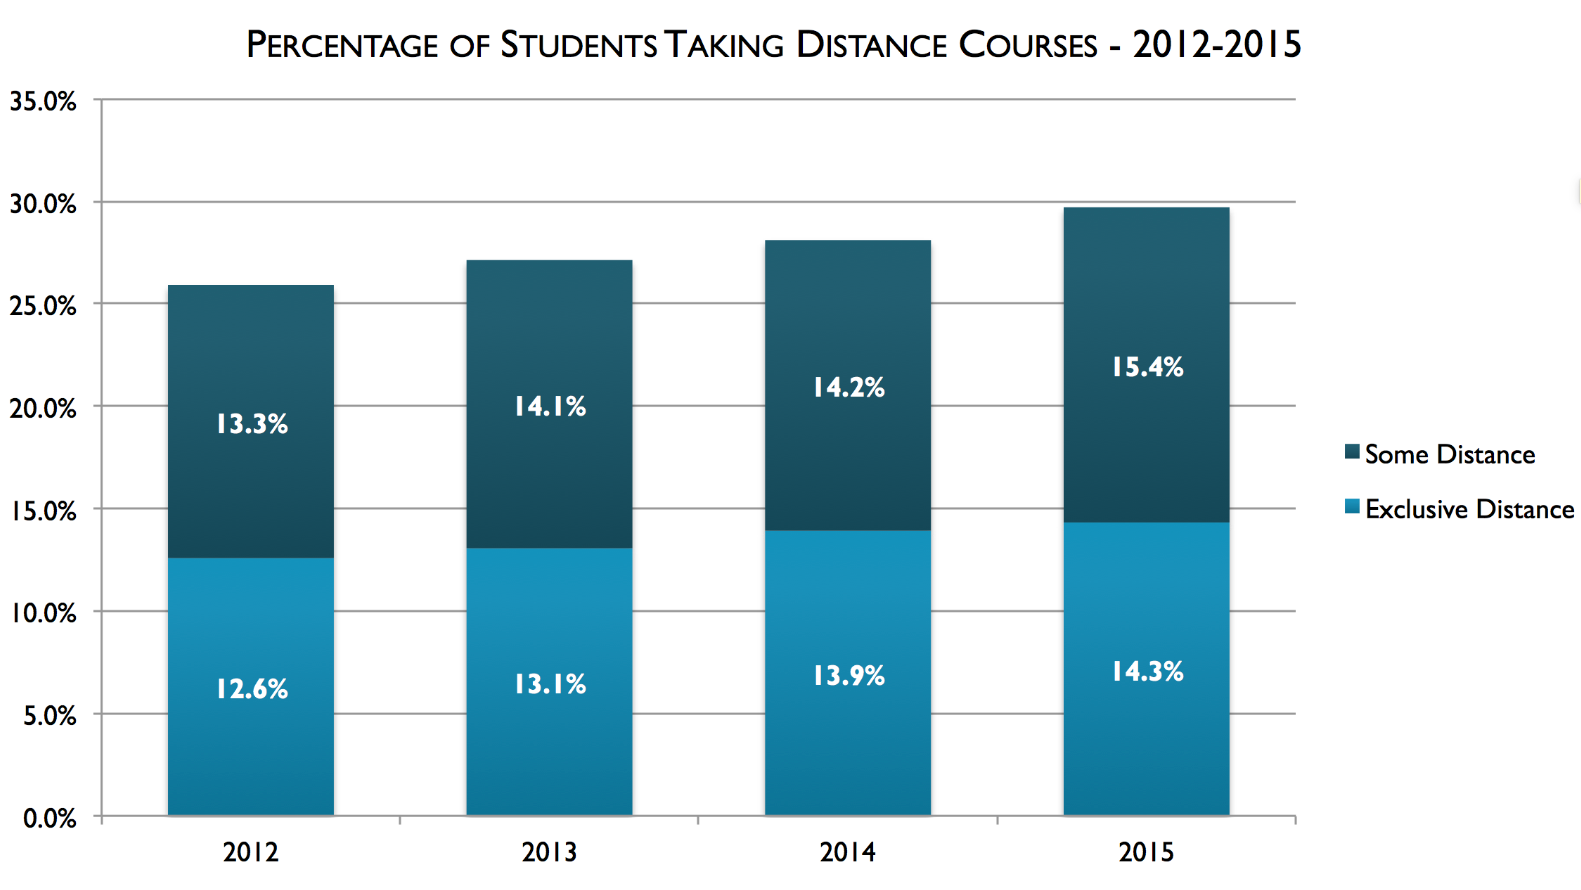 Title: Percentage of students taking distance courses, 2012-2015. For 2012, 12.6% were exclusively distance and 13.3% were some distance. For 2013, 13.1% were exclusively distance and 14.1% were some distance. For 2014, 13.9% were exclusively distance and 14.2% were some distance. For 2015, 14.3% were exclusively distance and 15.4% were some distance.